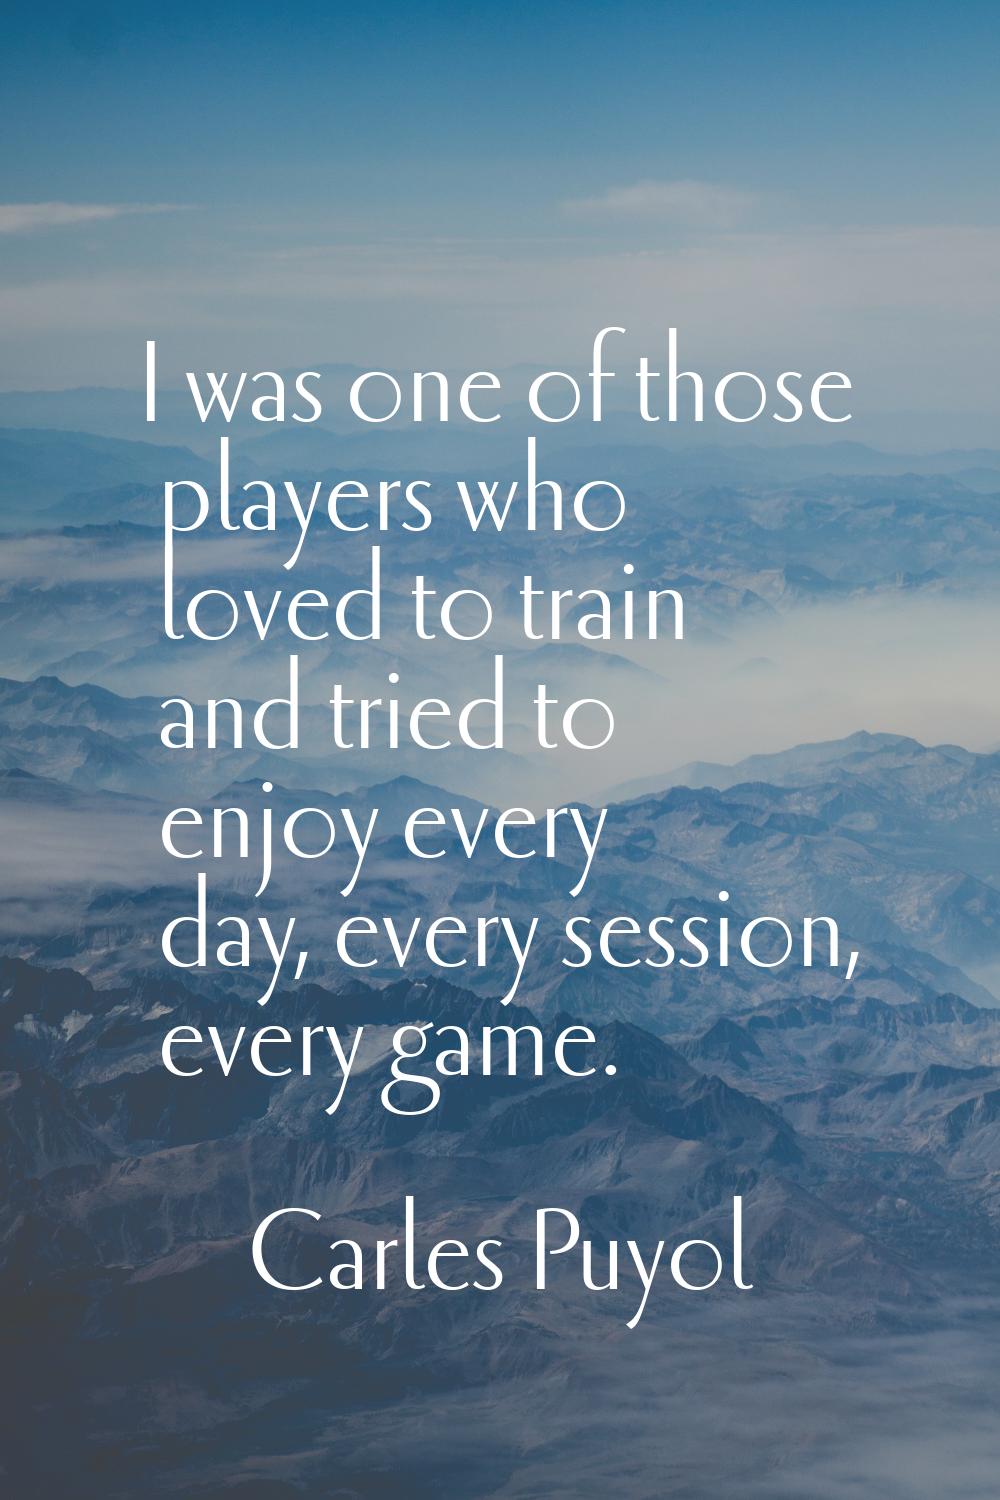 I was one of those players who loved to train and tried to enjoy every day, every session, every ga